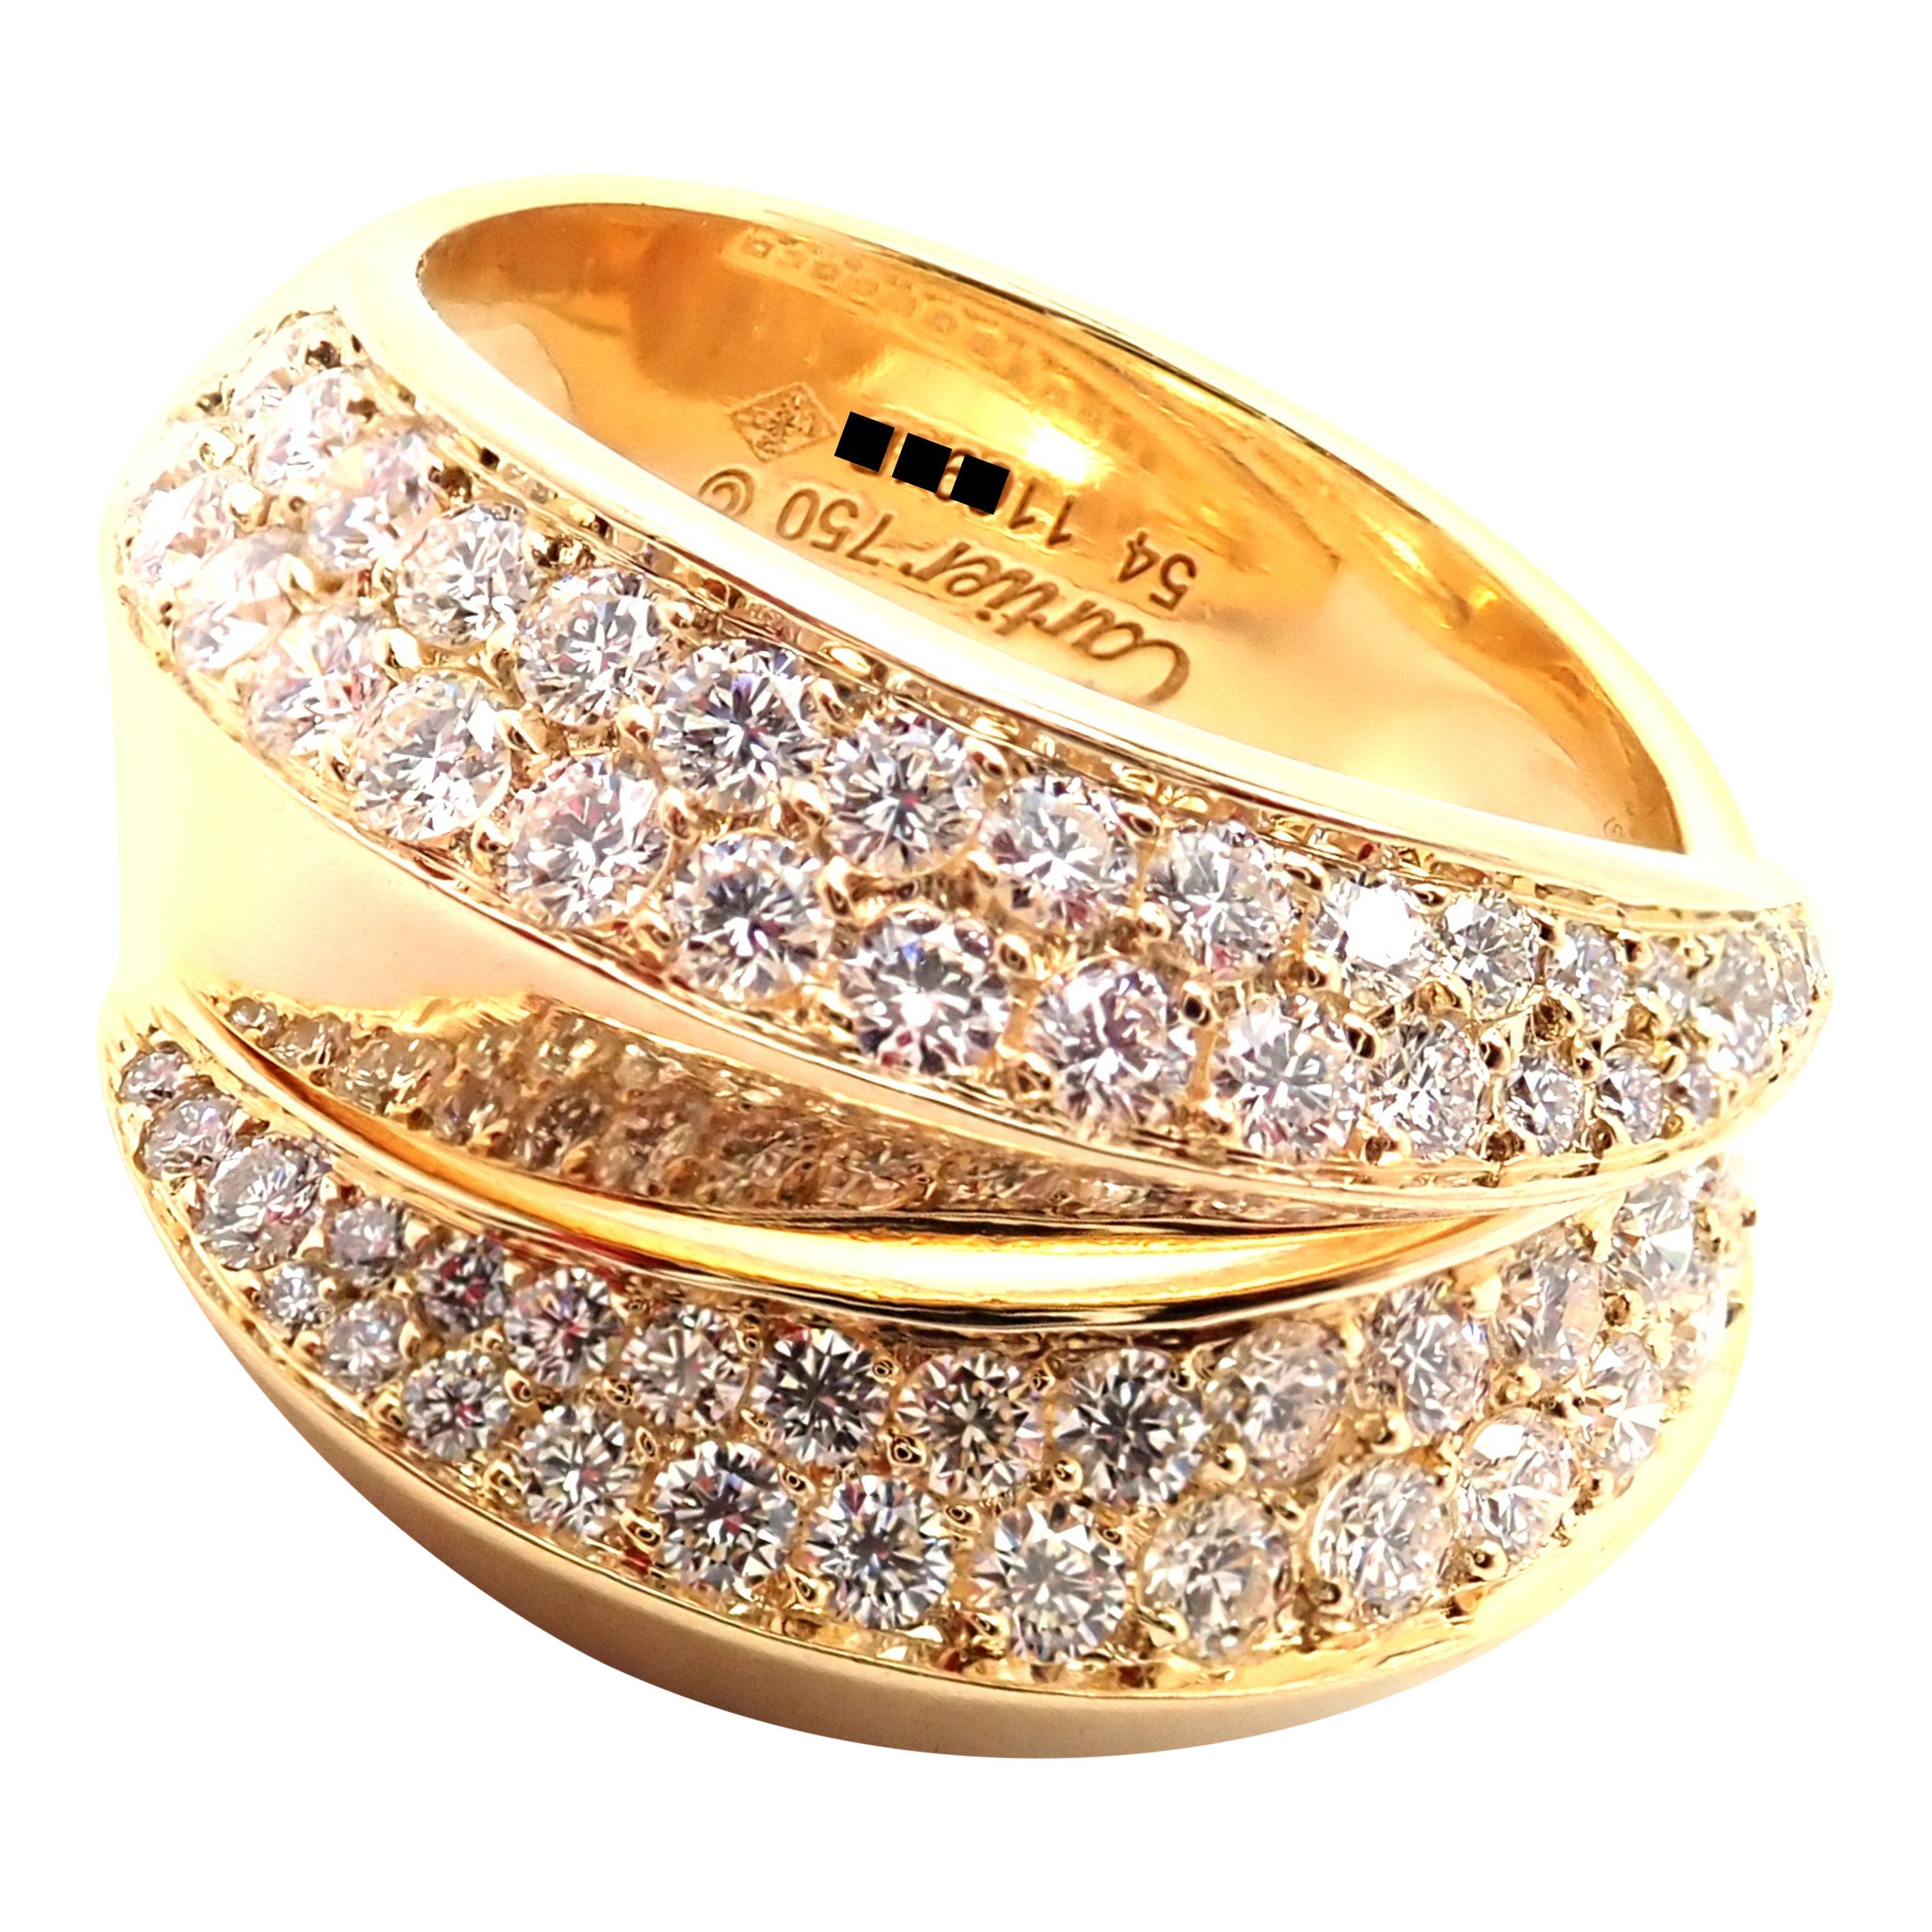 Cartier Panthere Gryph Diamant-Gelbgold-Ring im Angebot